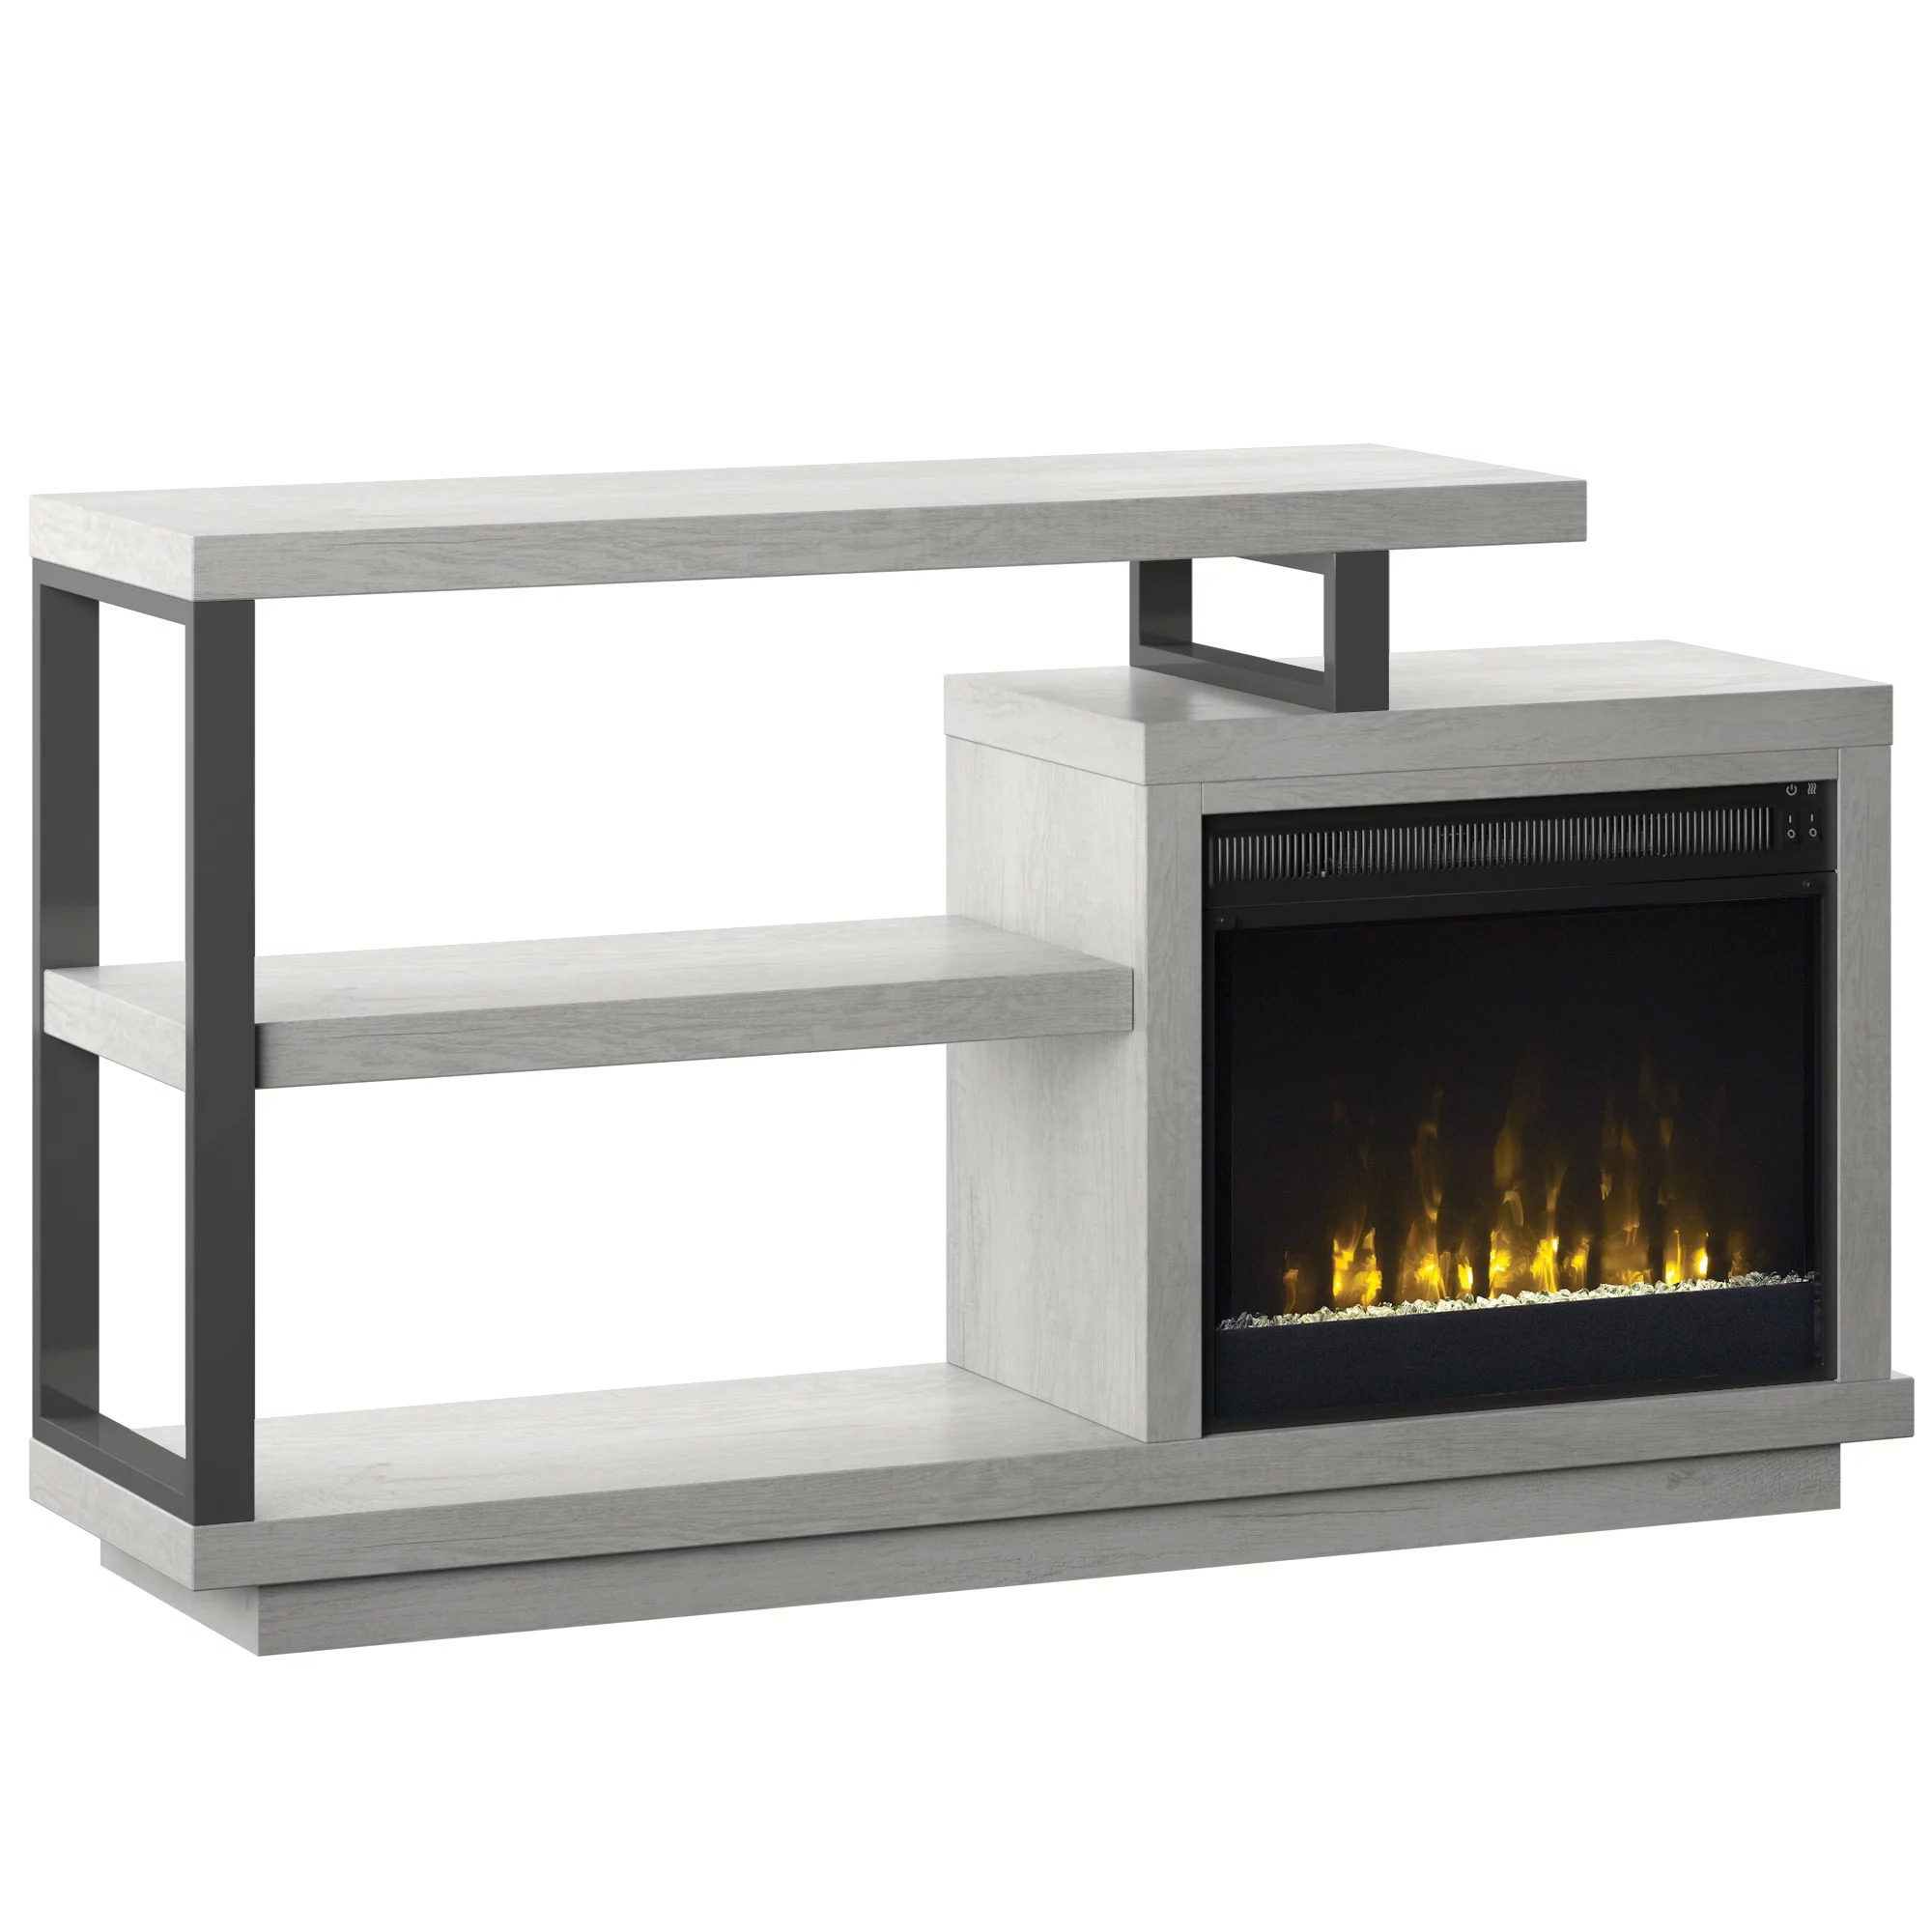 Twin Star Modern Fireplace TV Stand for TVs up to 55" w/ 4600 BTU ClassicFlame Electric Fireplace (Sargent Oak) $114 + Free Shipping